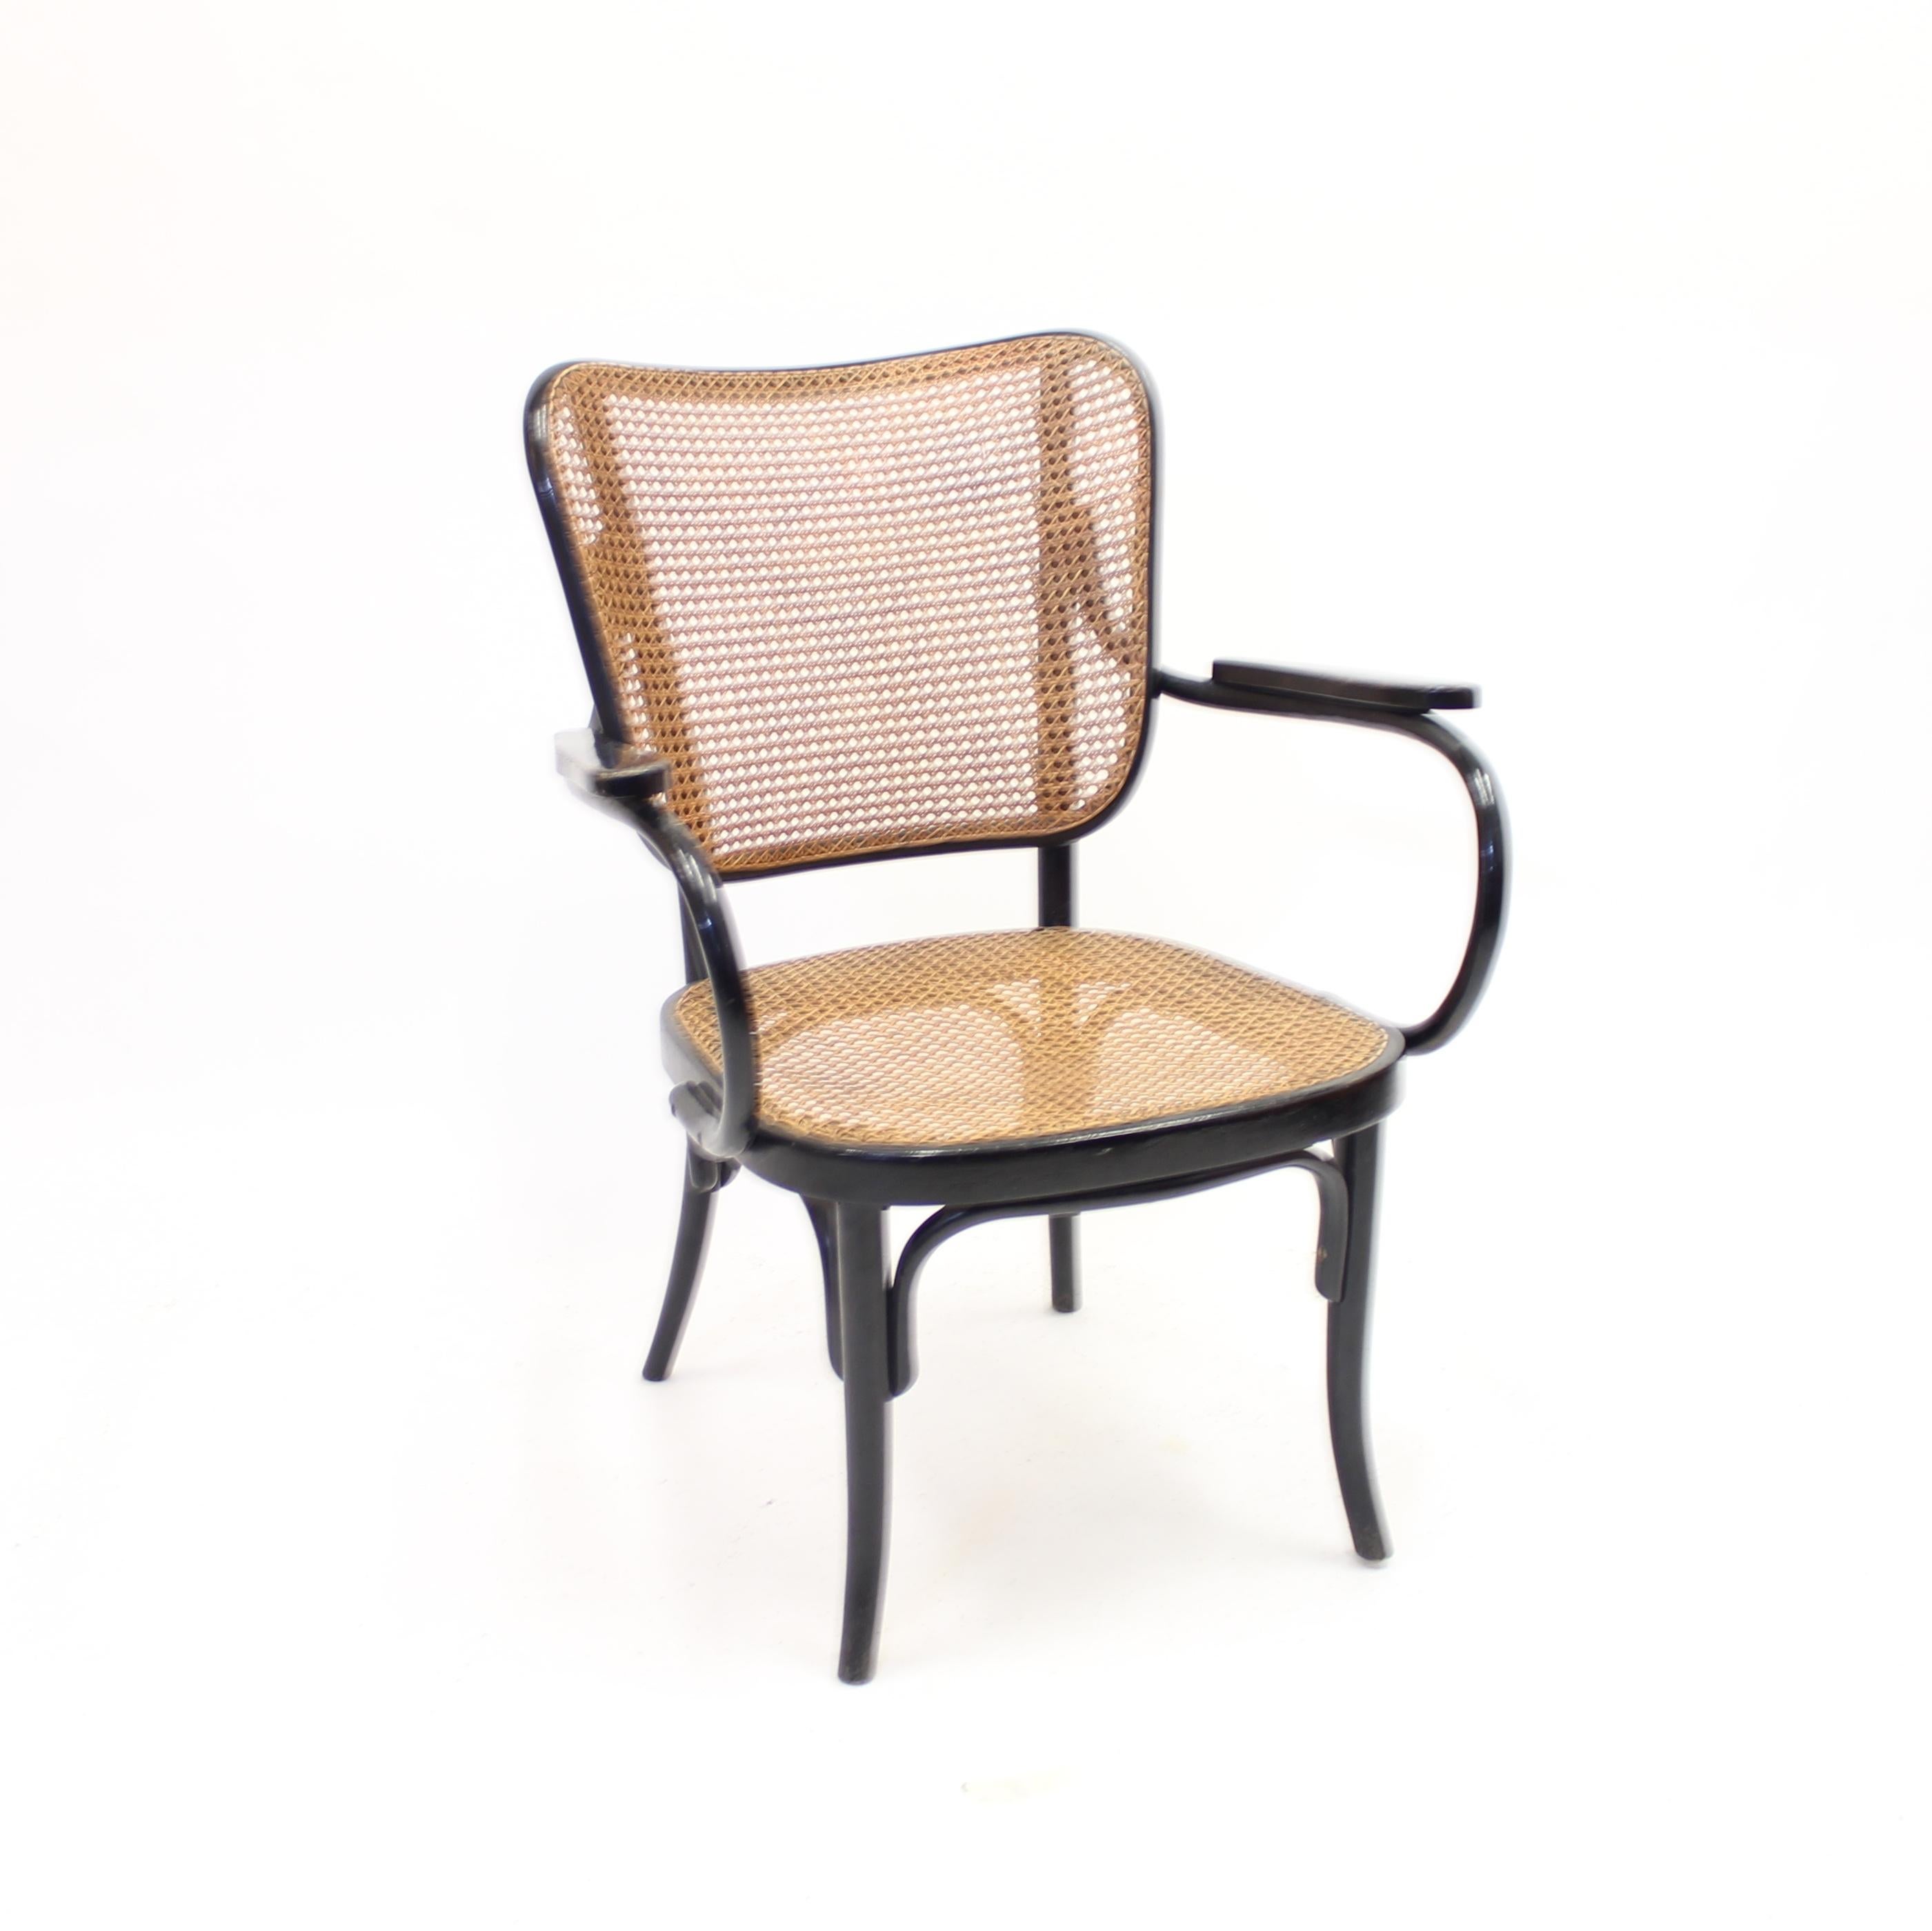 Eberhard Krauss, Rare Armchair Model A 821 F for Thonet, 1930 In Good Condition For Sale In Uppsala, SE